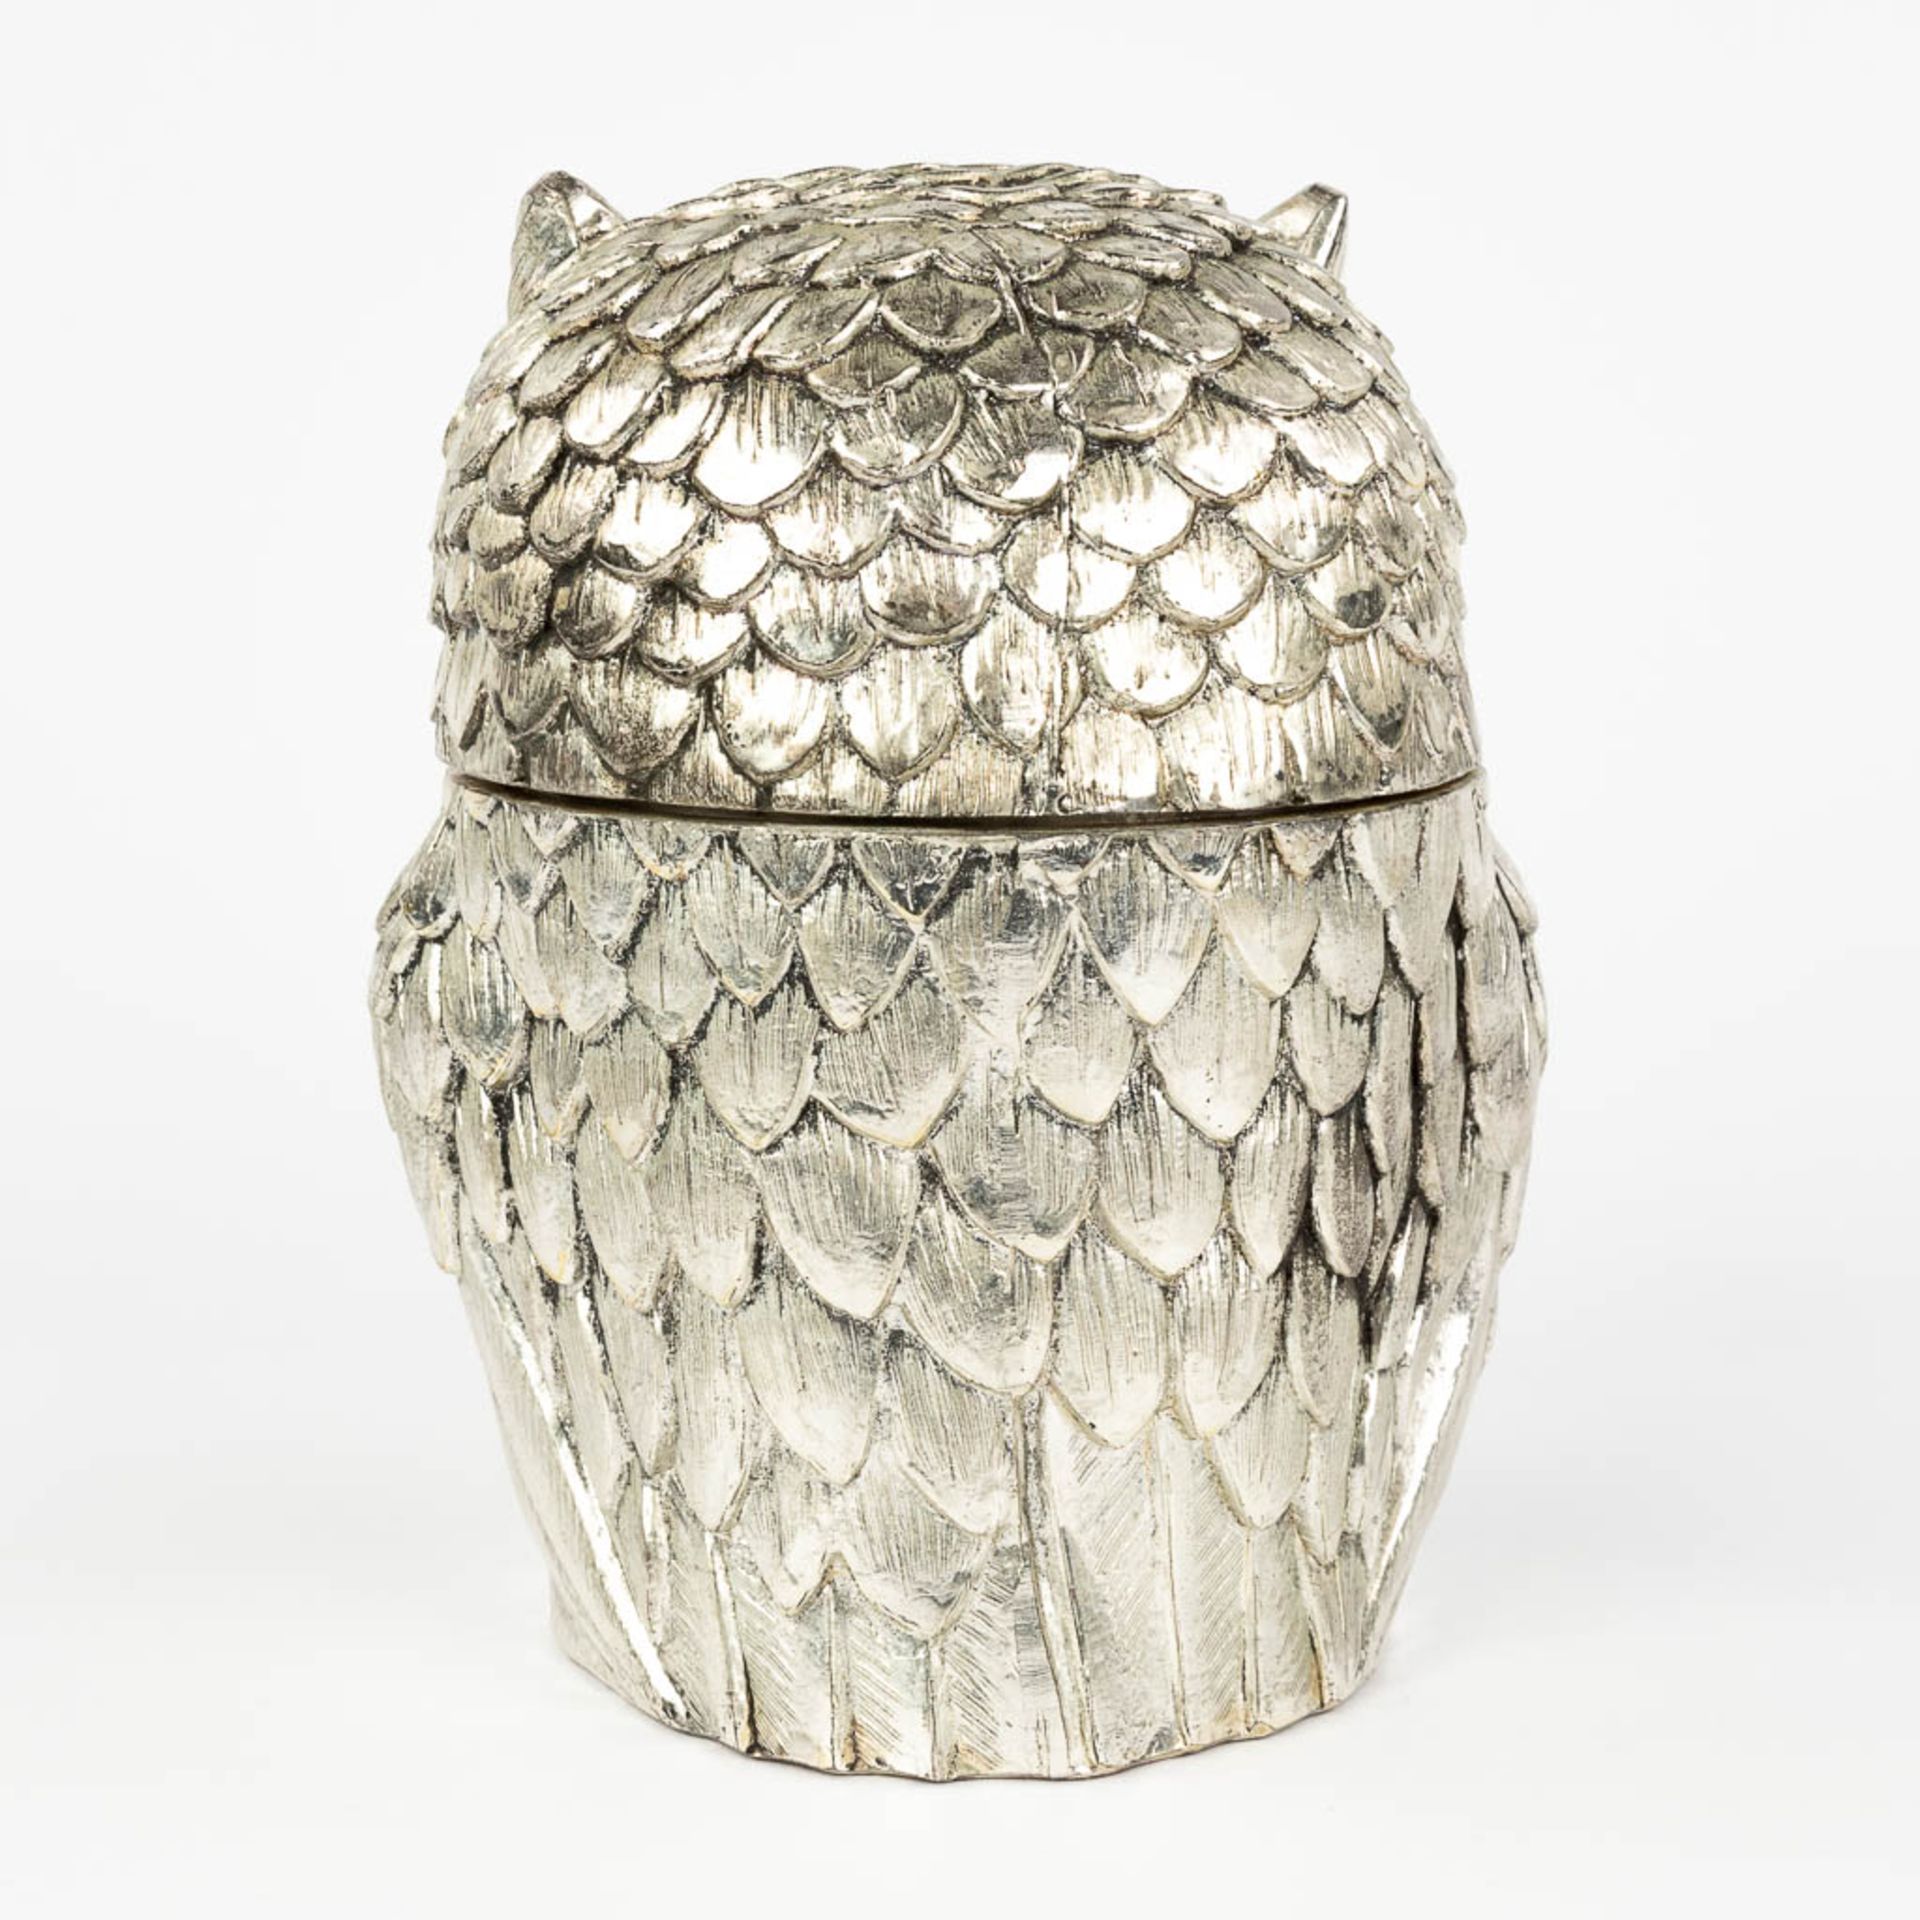 Mauro MANETTI (1946) 'Owl' a mid-century ice-pail. (W:15 x H:20 cm) - Image 8 of 12